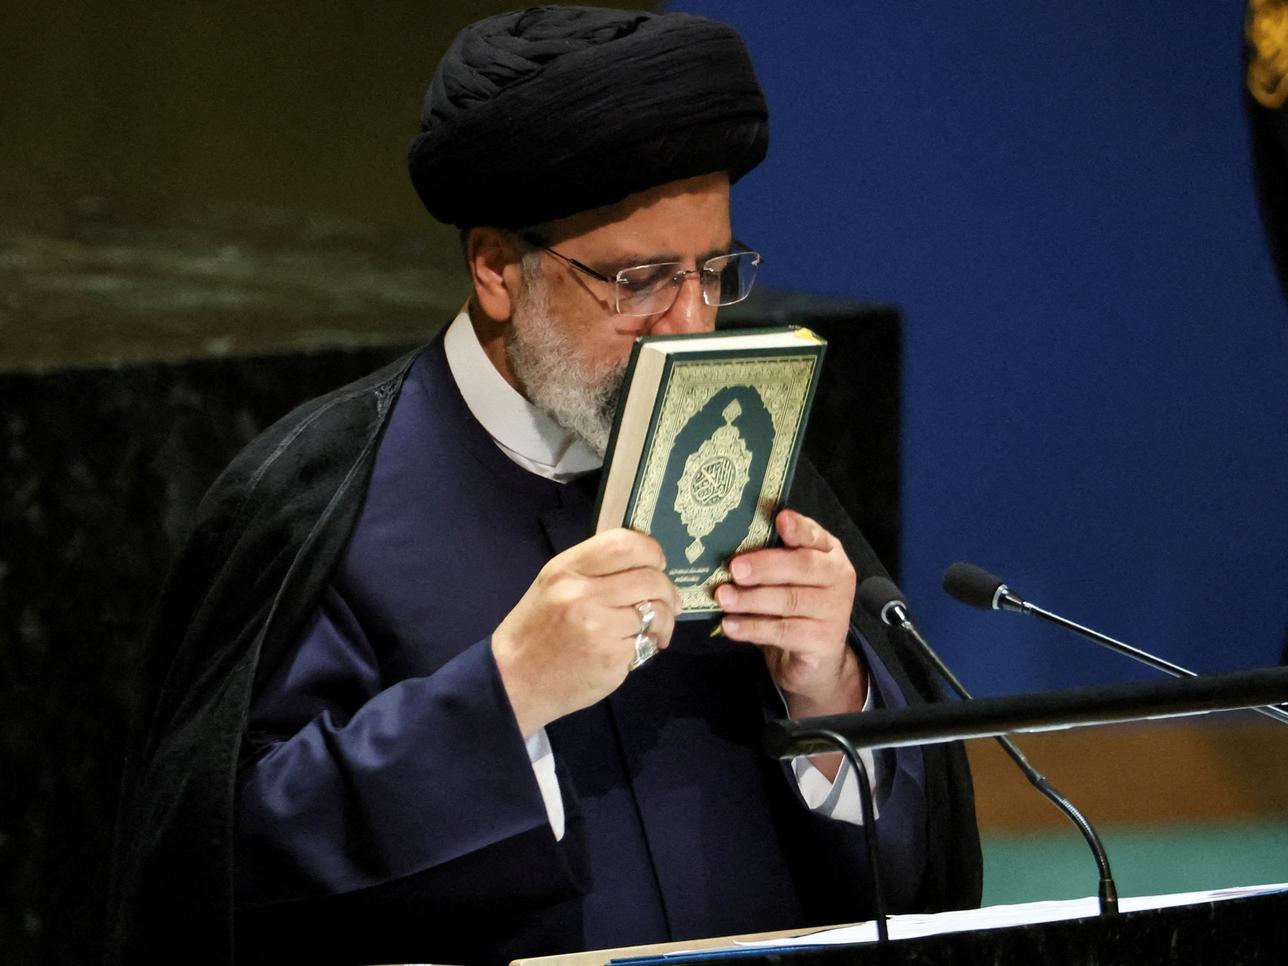 FILE PHOTO: Iran's President Ebrahim Raisi kisses the holy Koran as he addresses the 78th Session of the U.N. General Assembly in New York City, U.S., September 19, 2023. REUTERS/Brendan McDermid/File Photo